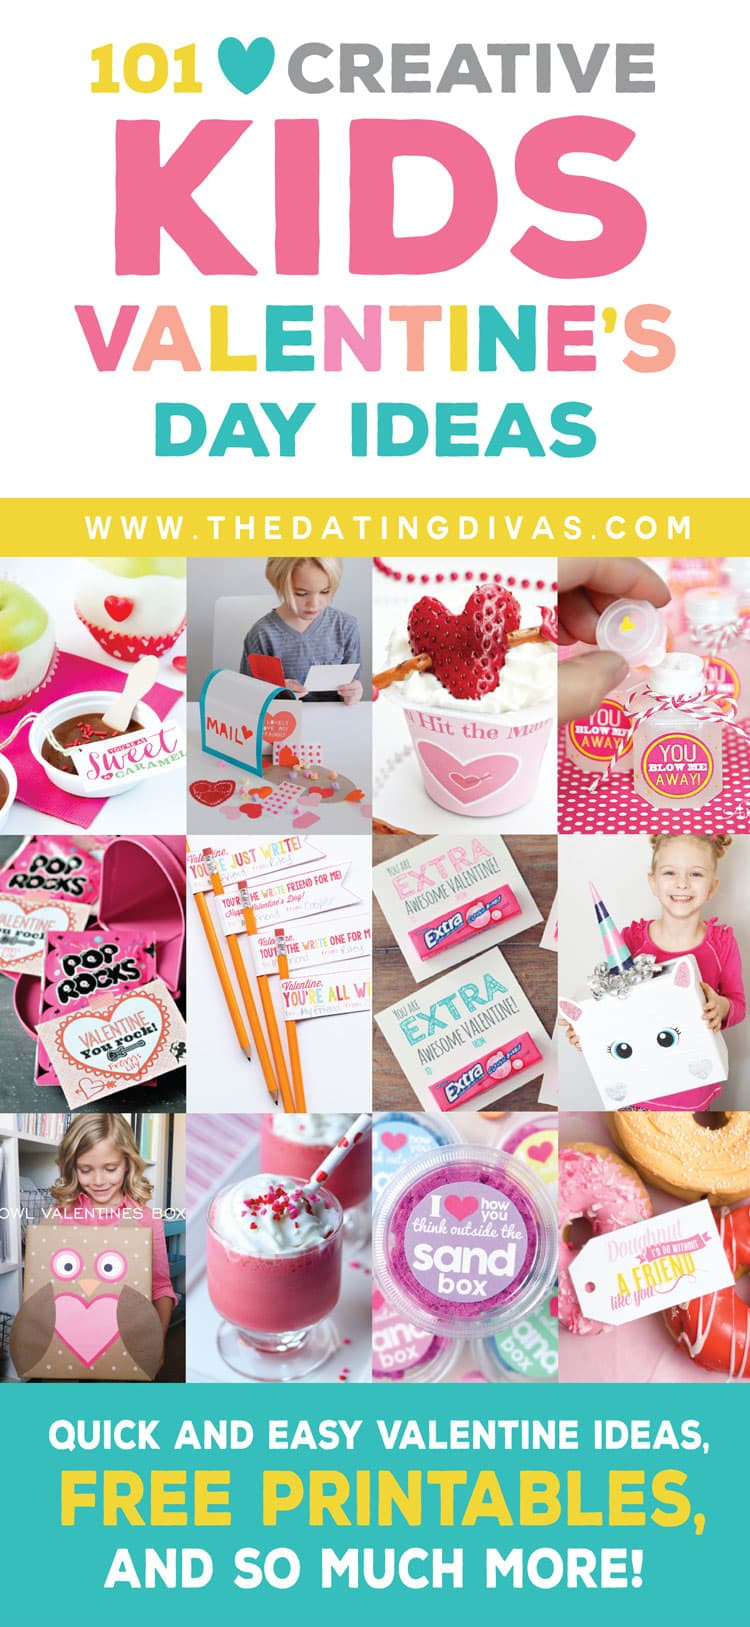 Valentines Day Ideas For Toddlers
 Kids Valentine s Day Ideas From The Dating Divas